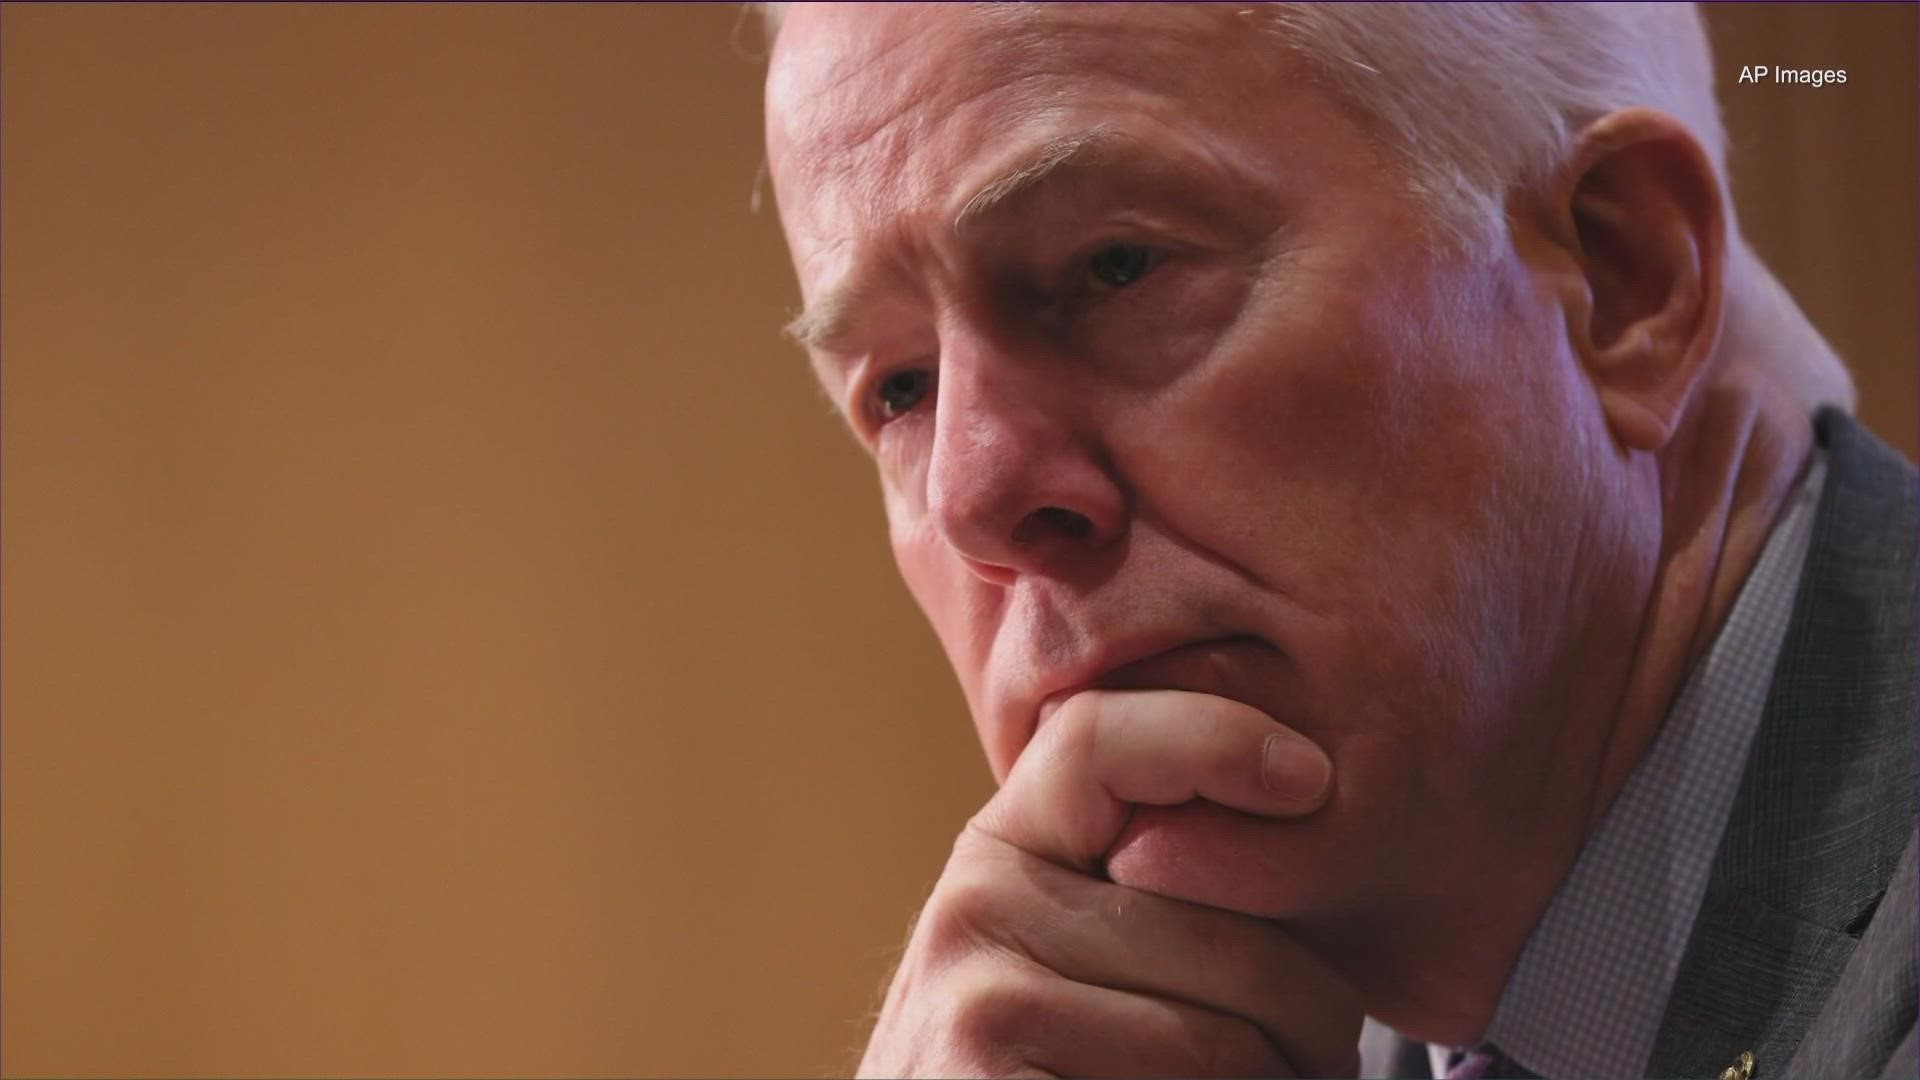 Cornyn plans to work remotely while quarantining.